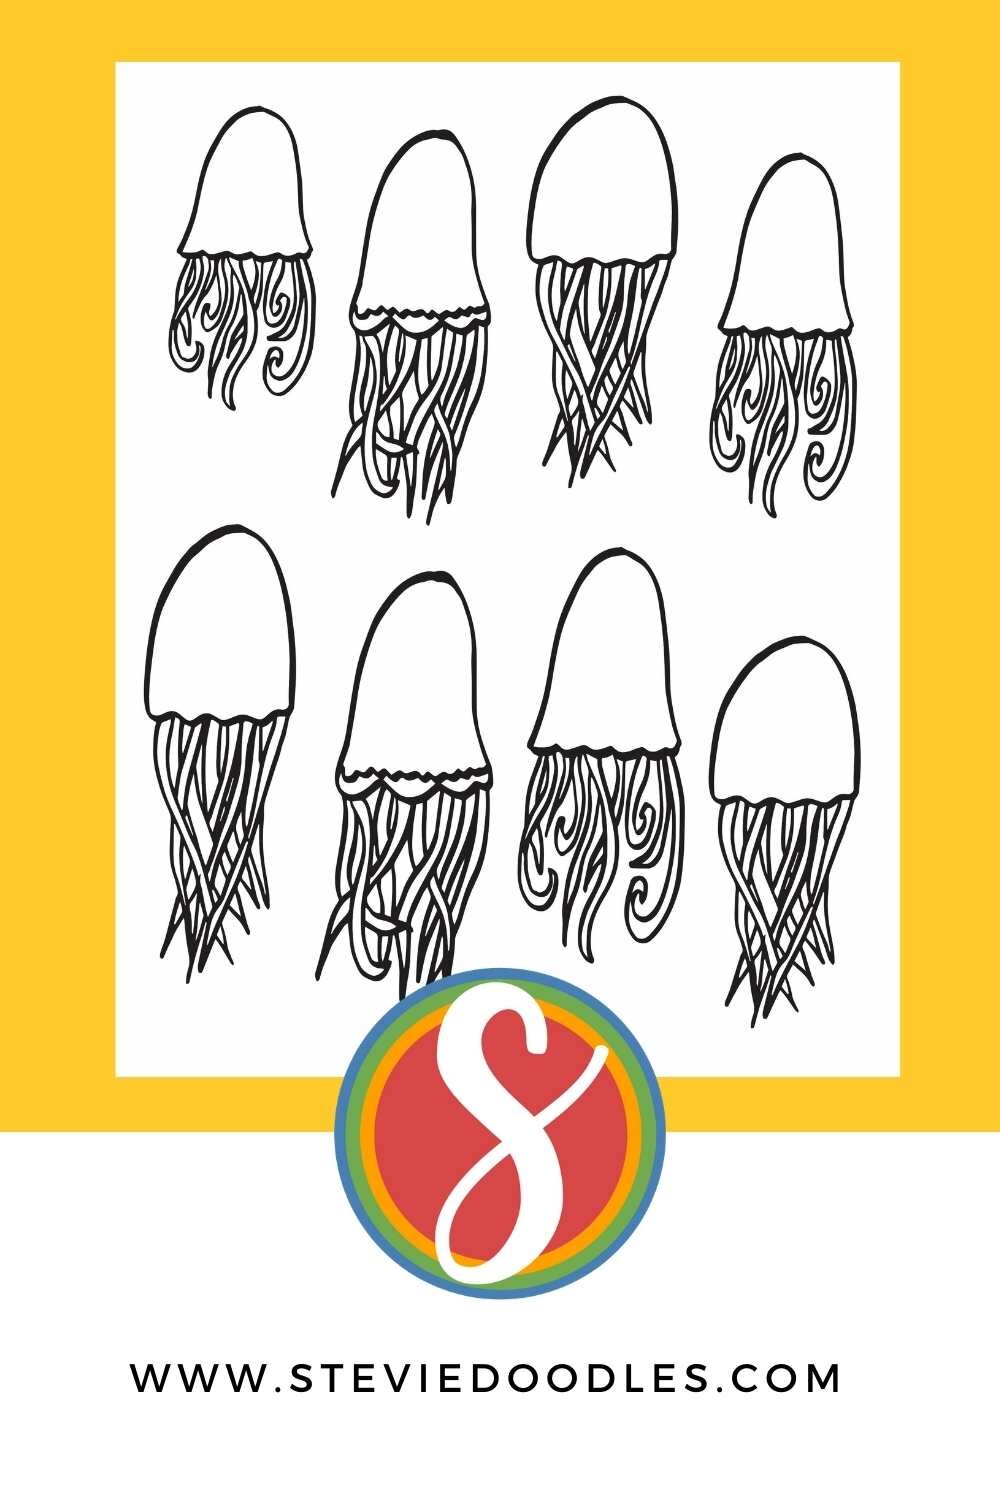 image is an uncolored coloring page full of plain jellyfish on a yellow background